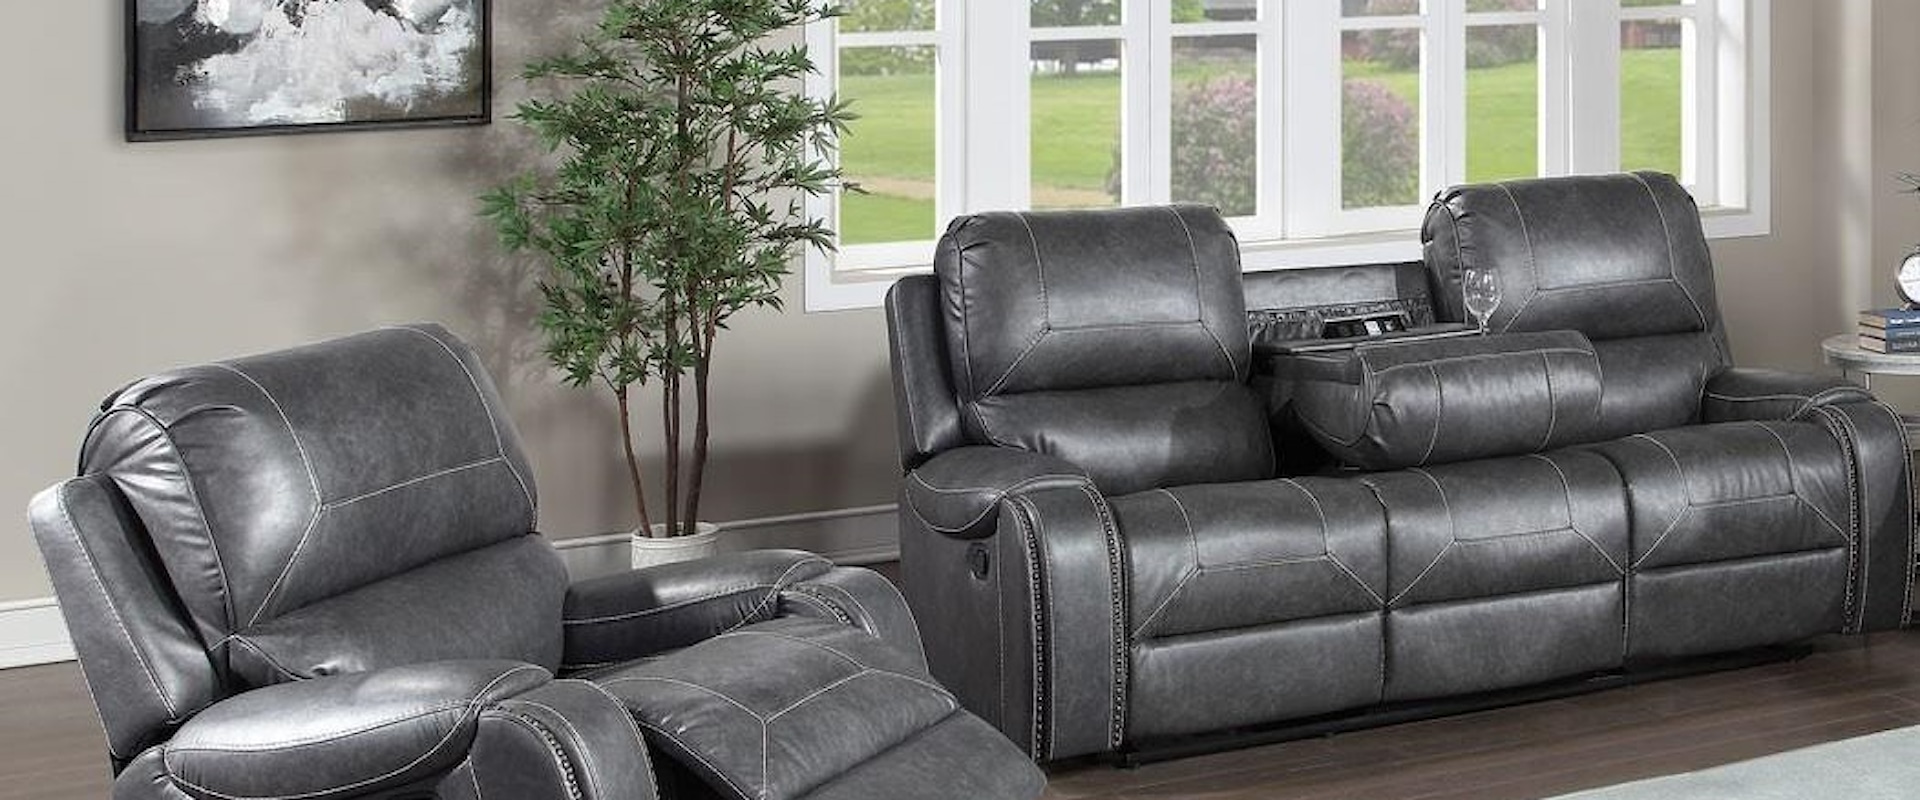 Reclining Sofa with Drop Down Console and Rocker Recliner Set